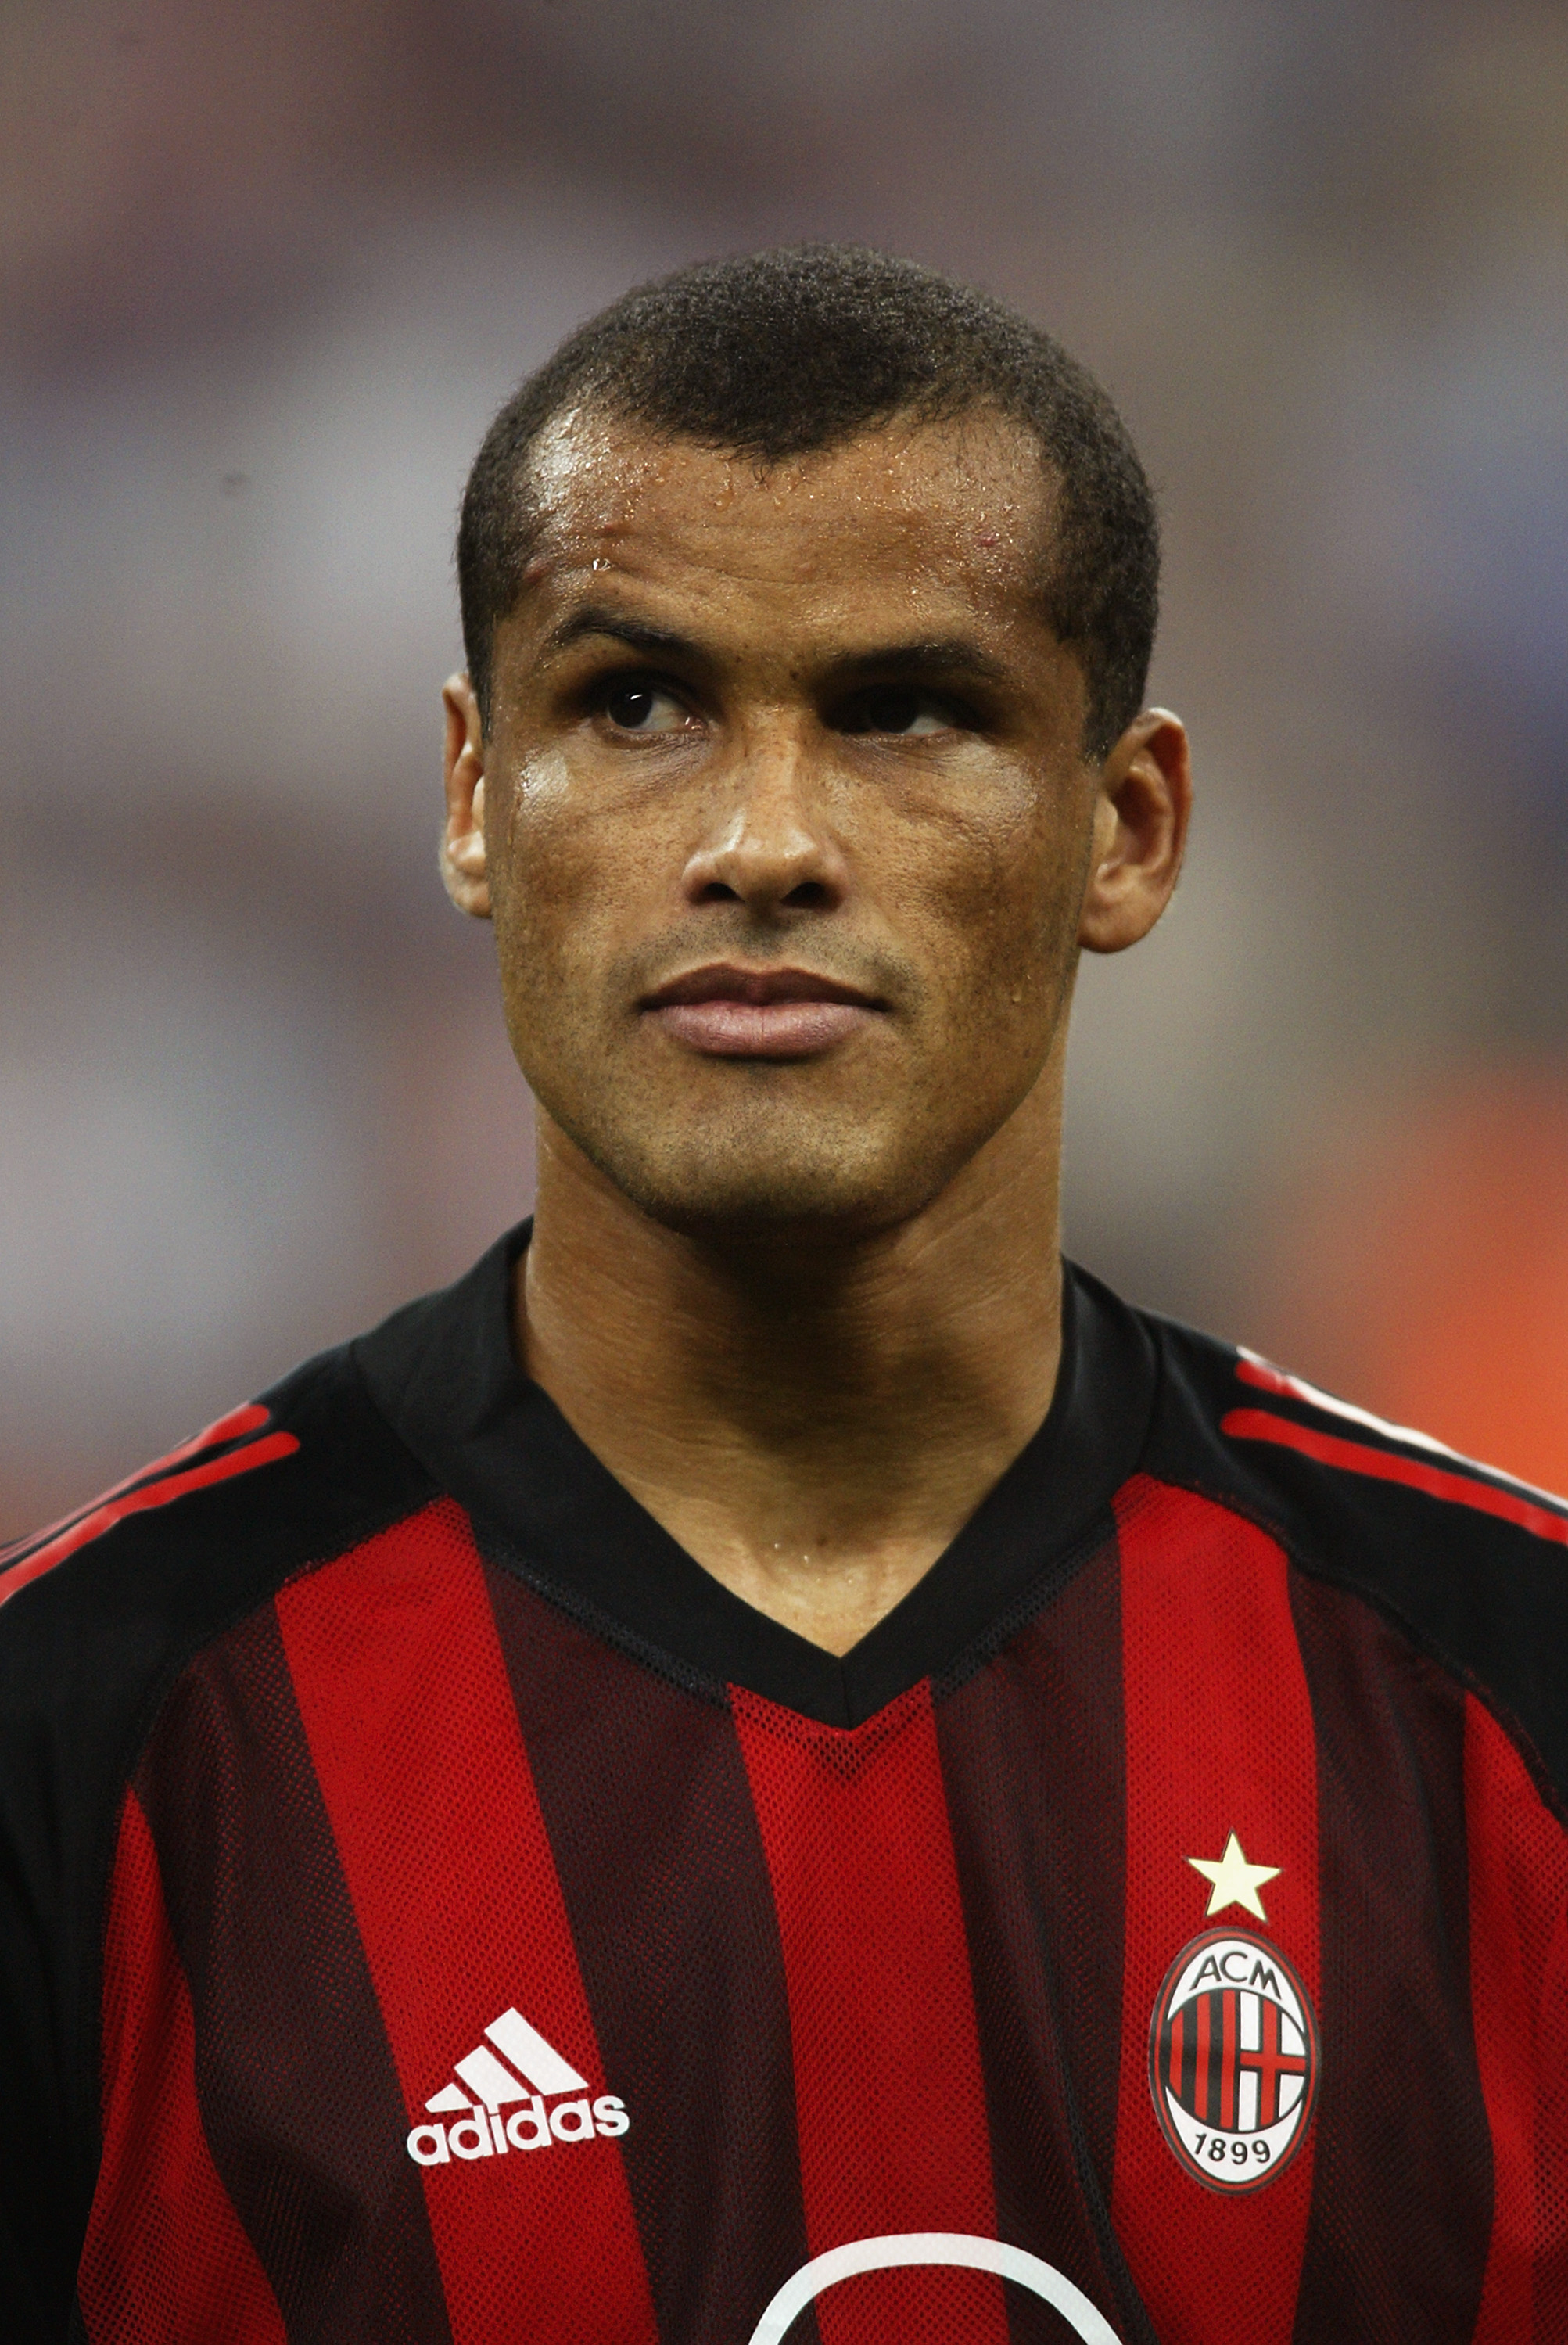 MILAN - SEPTEMBER 18:  Rivaldo of Milan lines up before the UEFA Champions League match between AC Milan and RC Lens held at the Giuseppe Meazza, San Siro Stadium in Milan on September 18, 2002 (Photo by Gary M Prior/Getty Images) AC Milan won the match 2